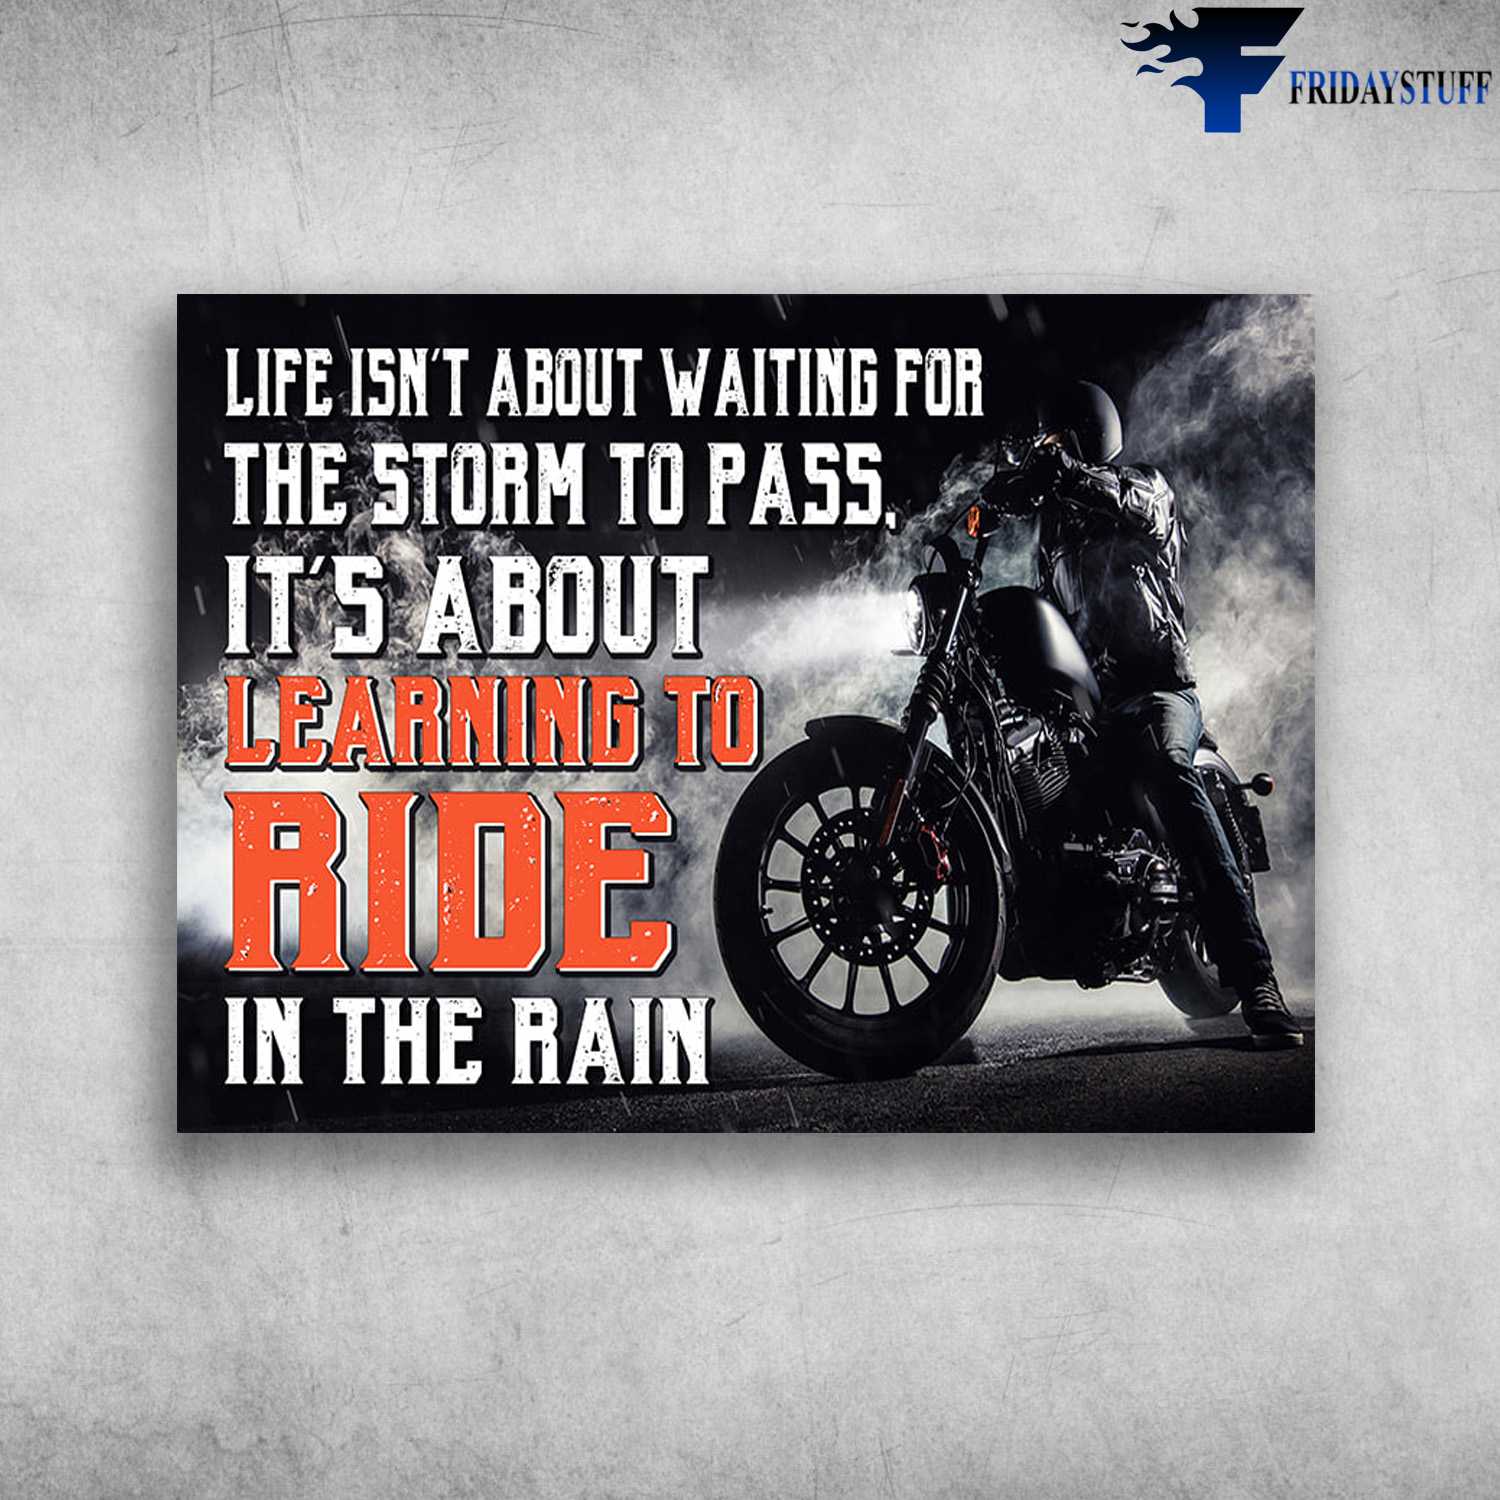 Biker Riding, Motorcycle Man - Life Isn't About Waiting For, The Storm To Pass, It's About Learning To Ride In The Rain